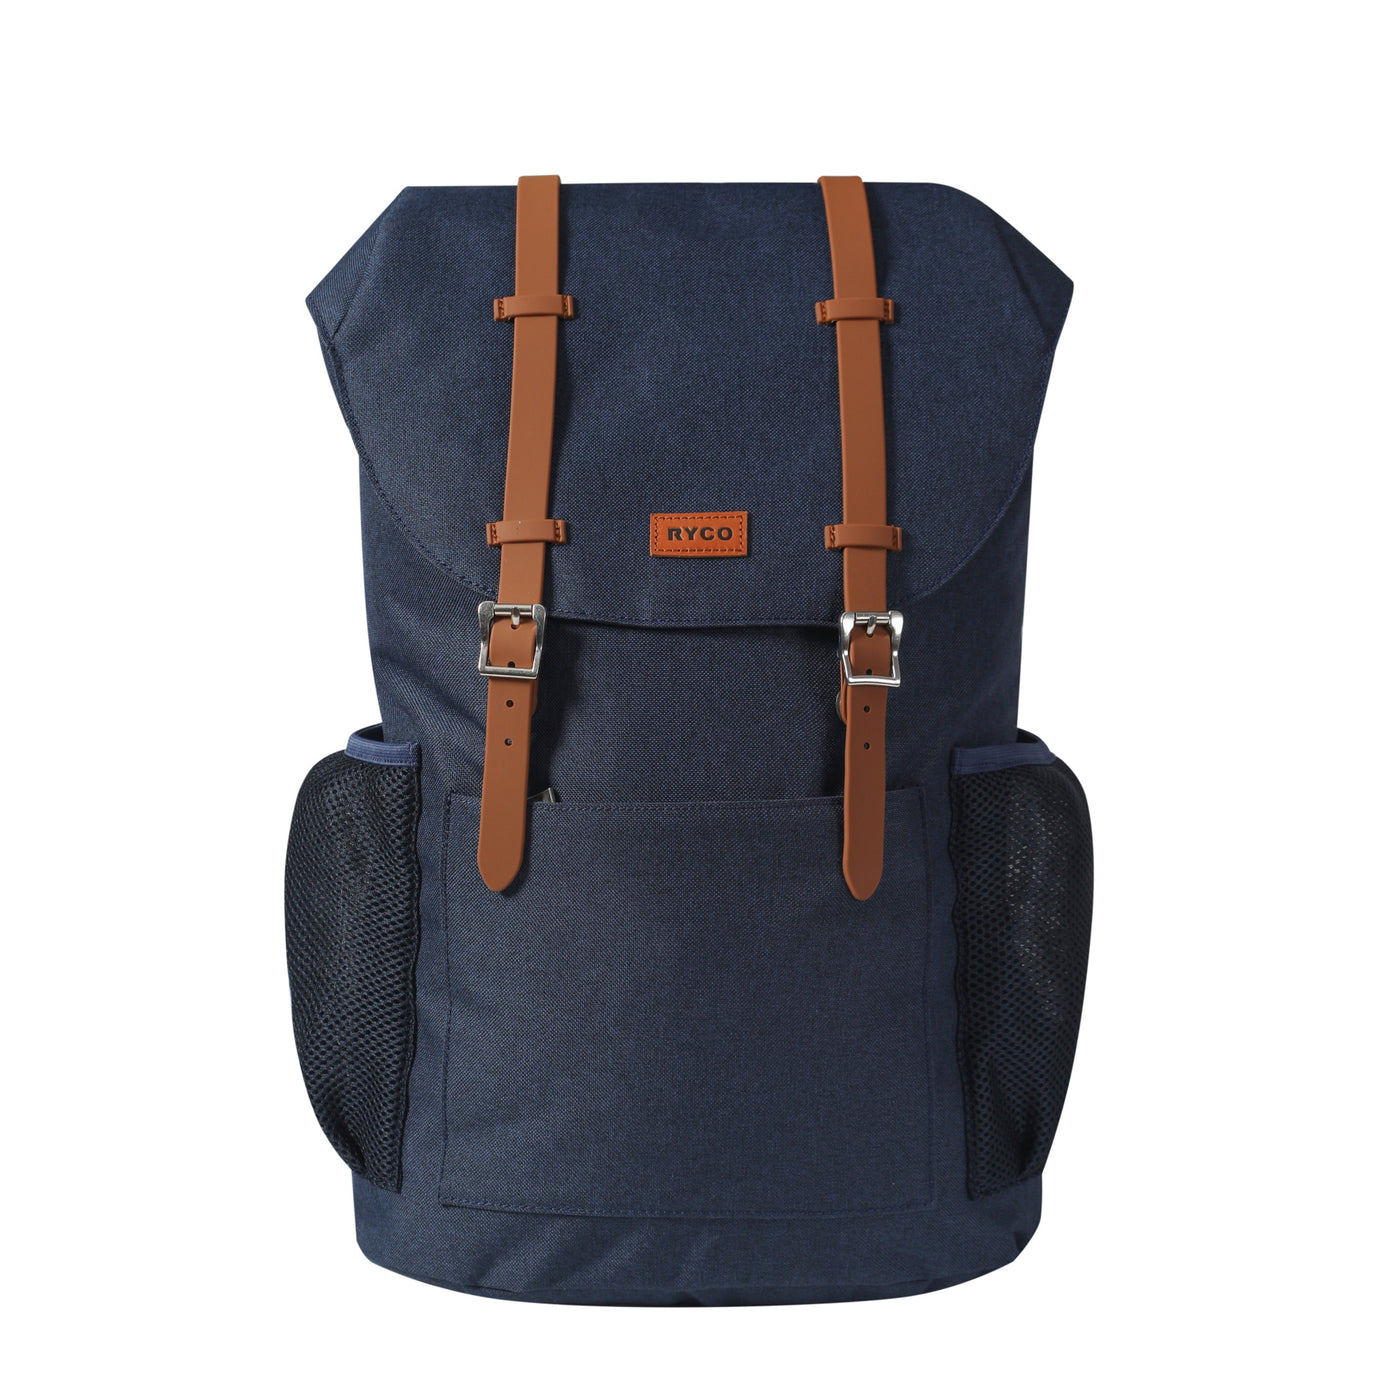 Coco Backpack - Navy